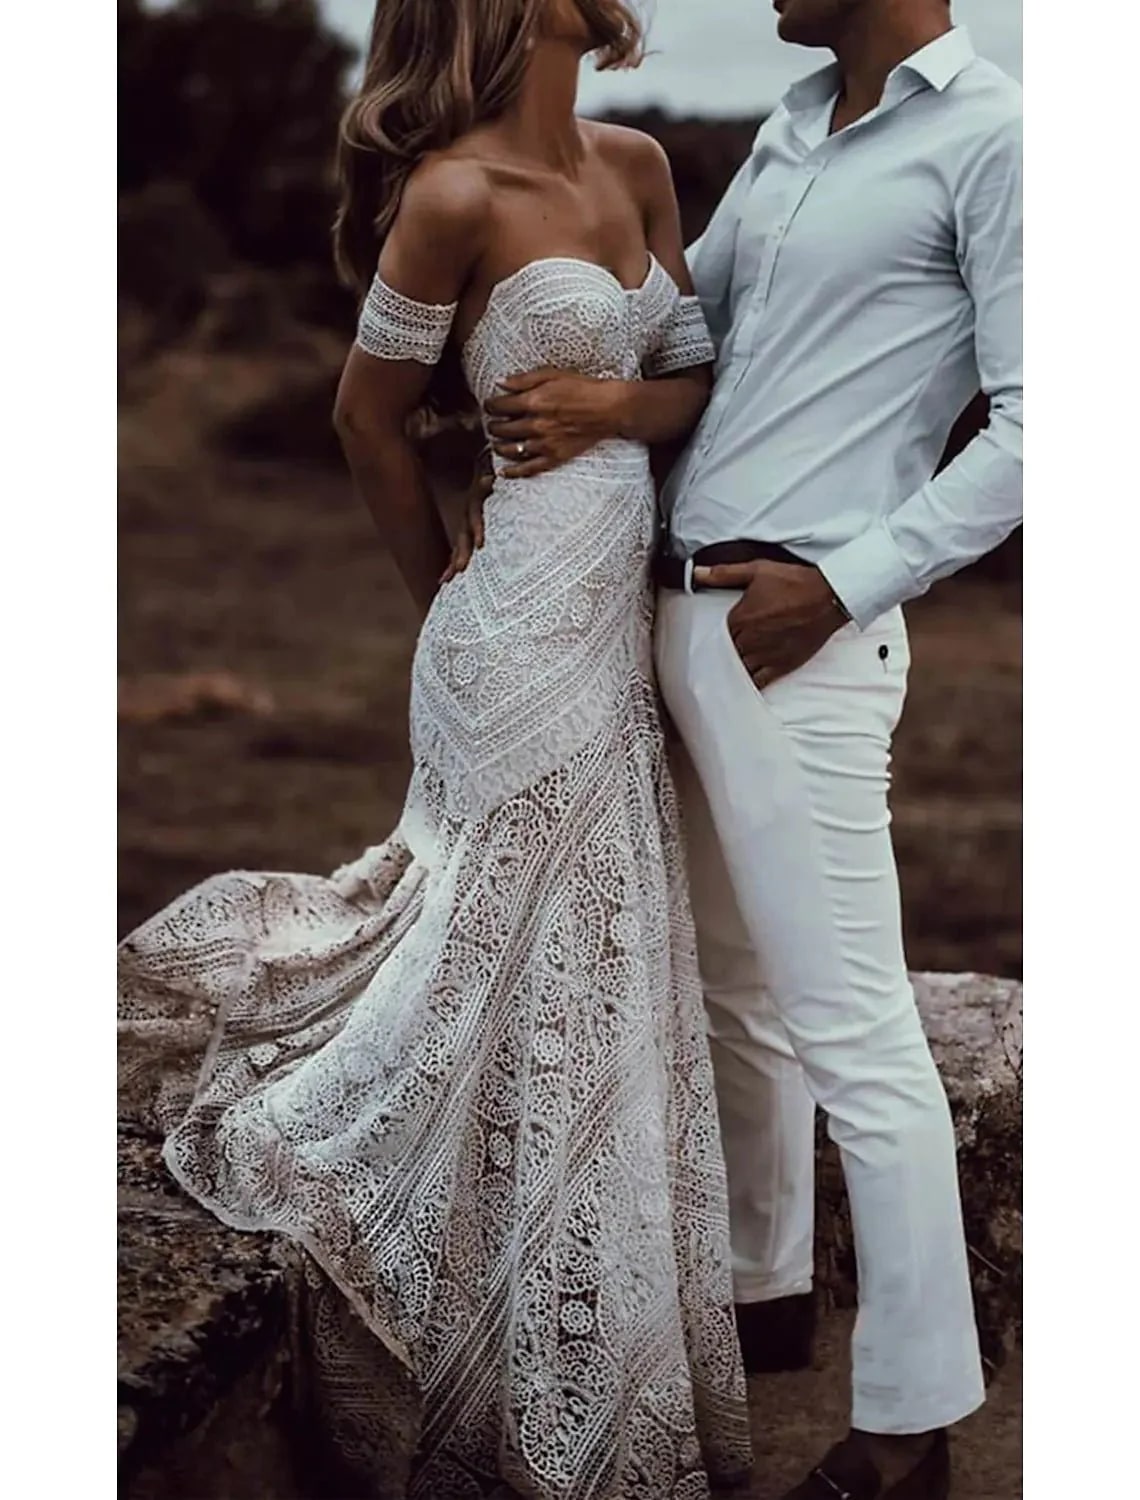 Women's Bohemian Wedding Dresses with Detachable Arm Bands Sweetheart Mermaid Lace Bridal Gown